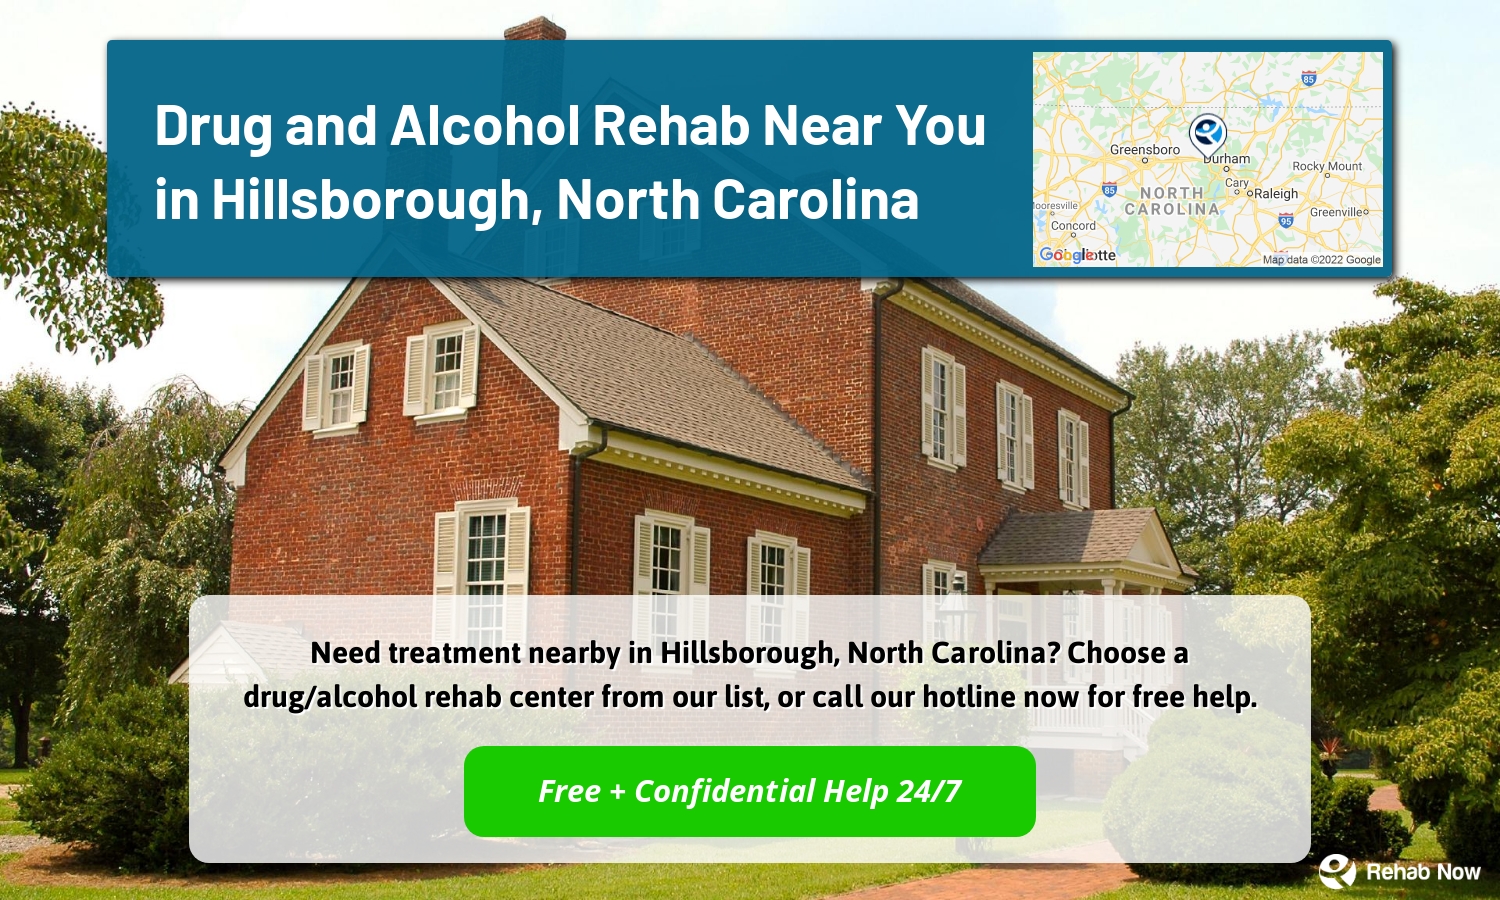 Need treatment nearby in Hillsborough, North Carolina? Choose a drug/alcohol rehab center from our list, or call our hotline now for free help.